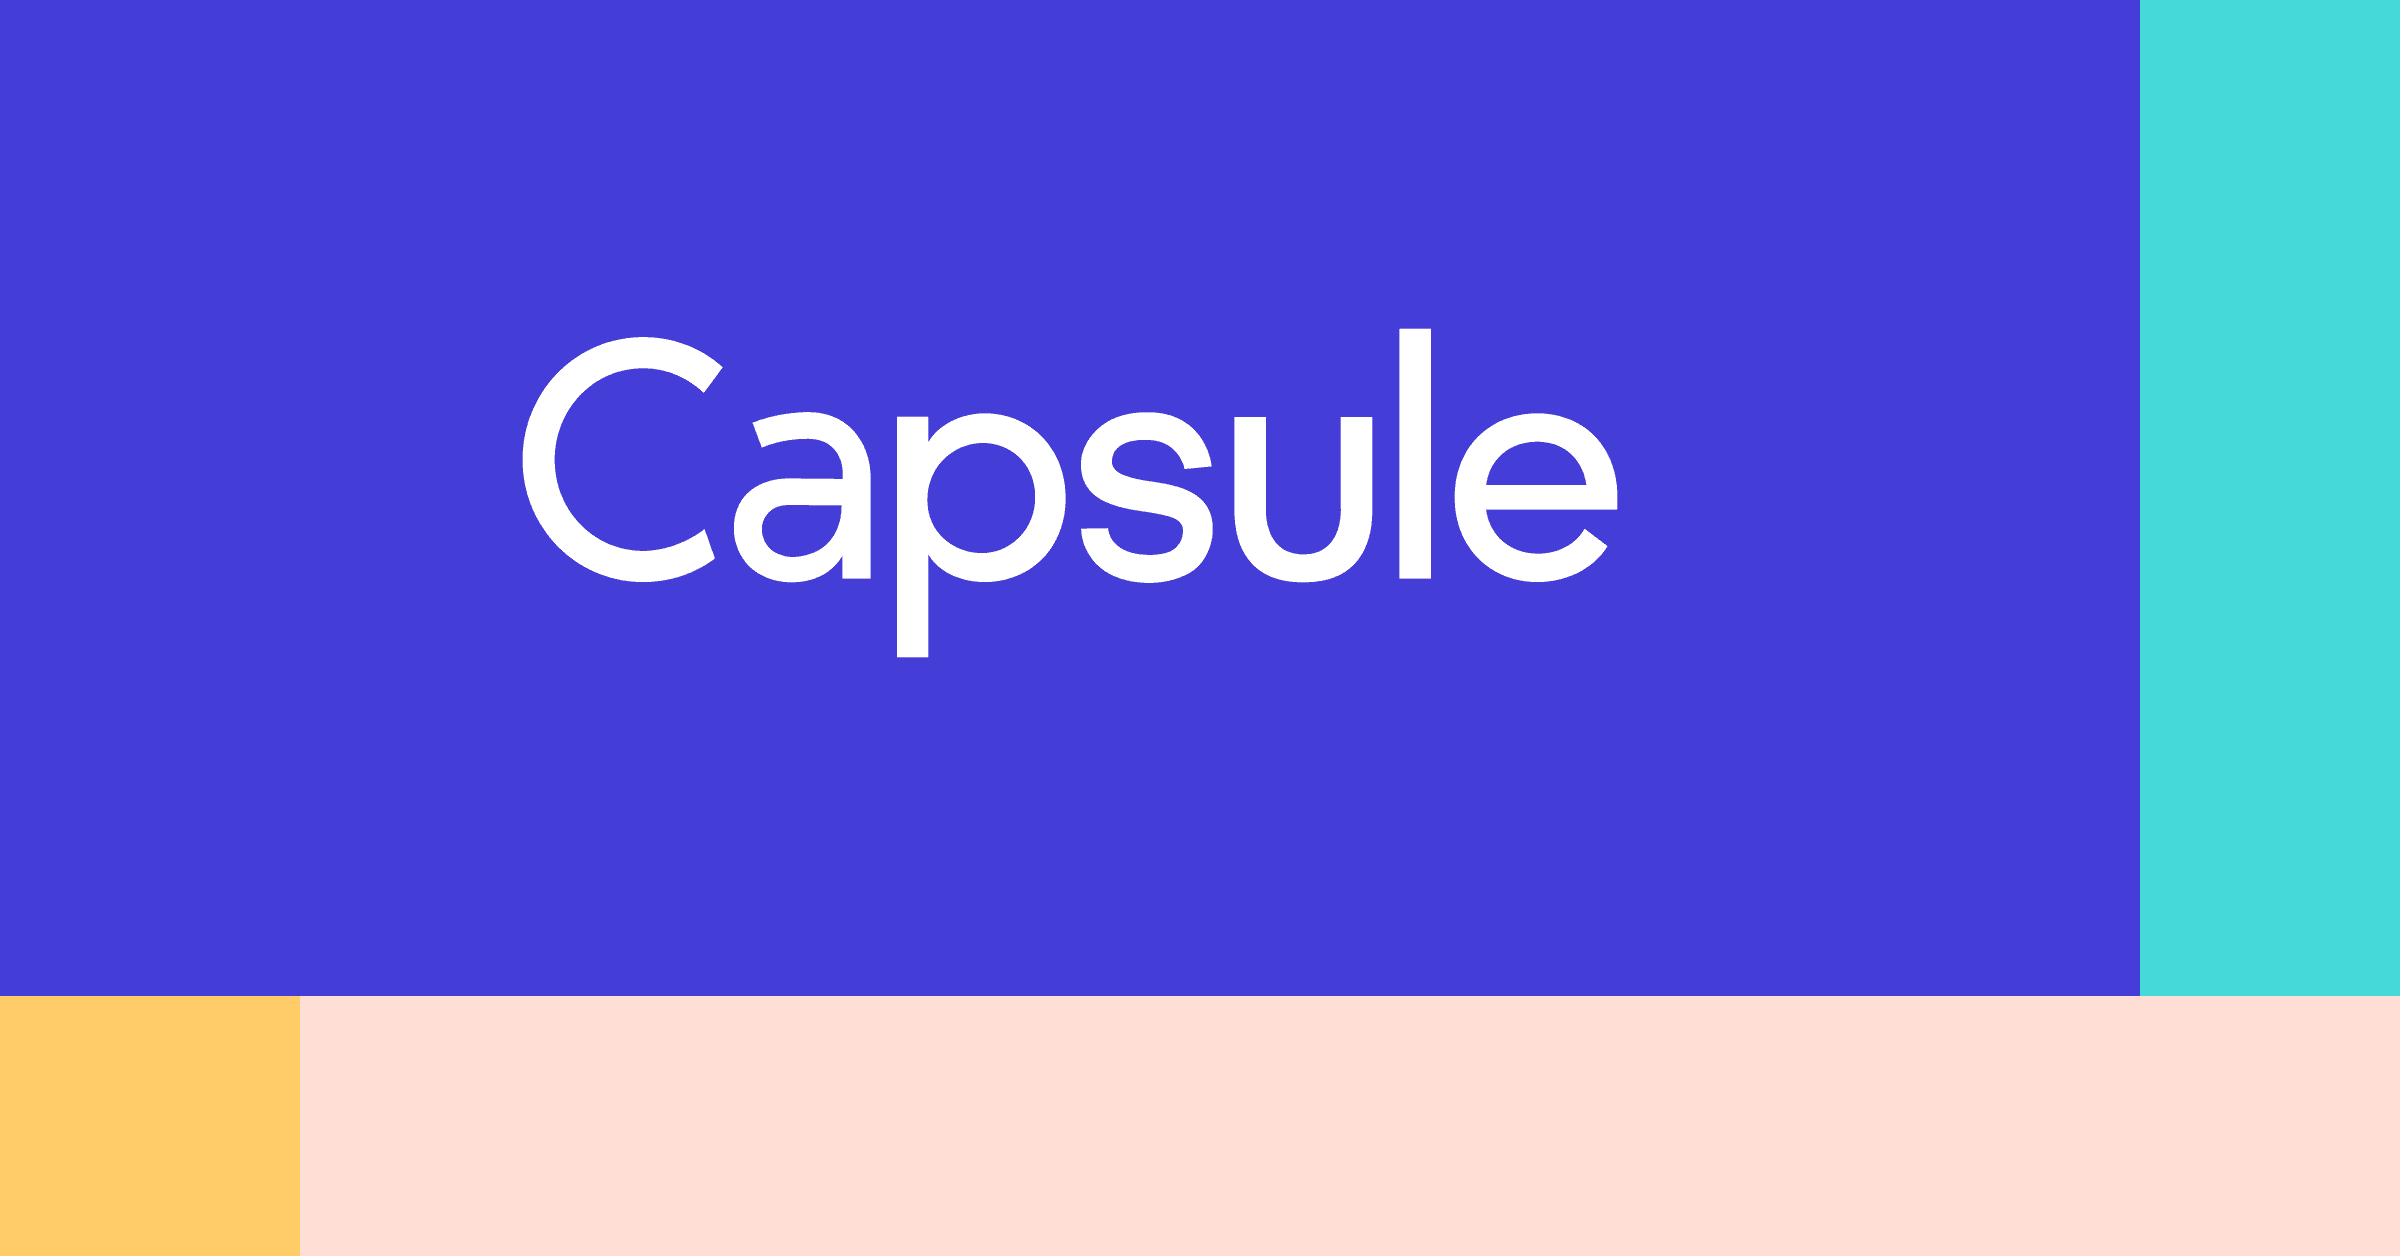 Meet our refreshed brand, a more expressive Capsule